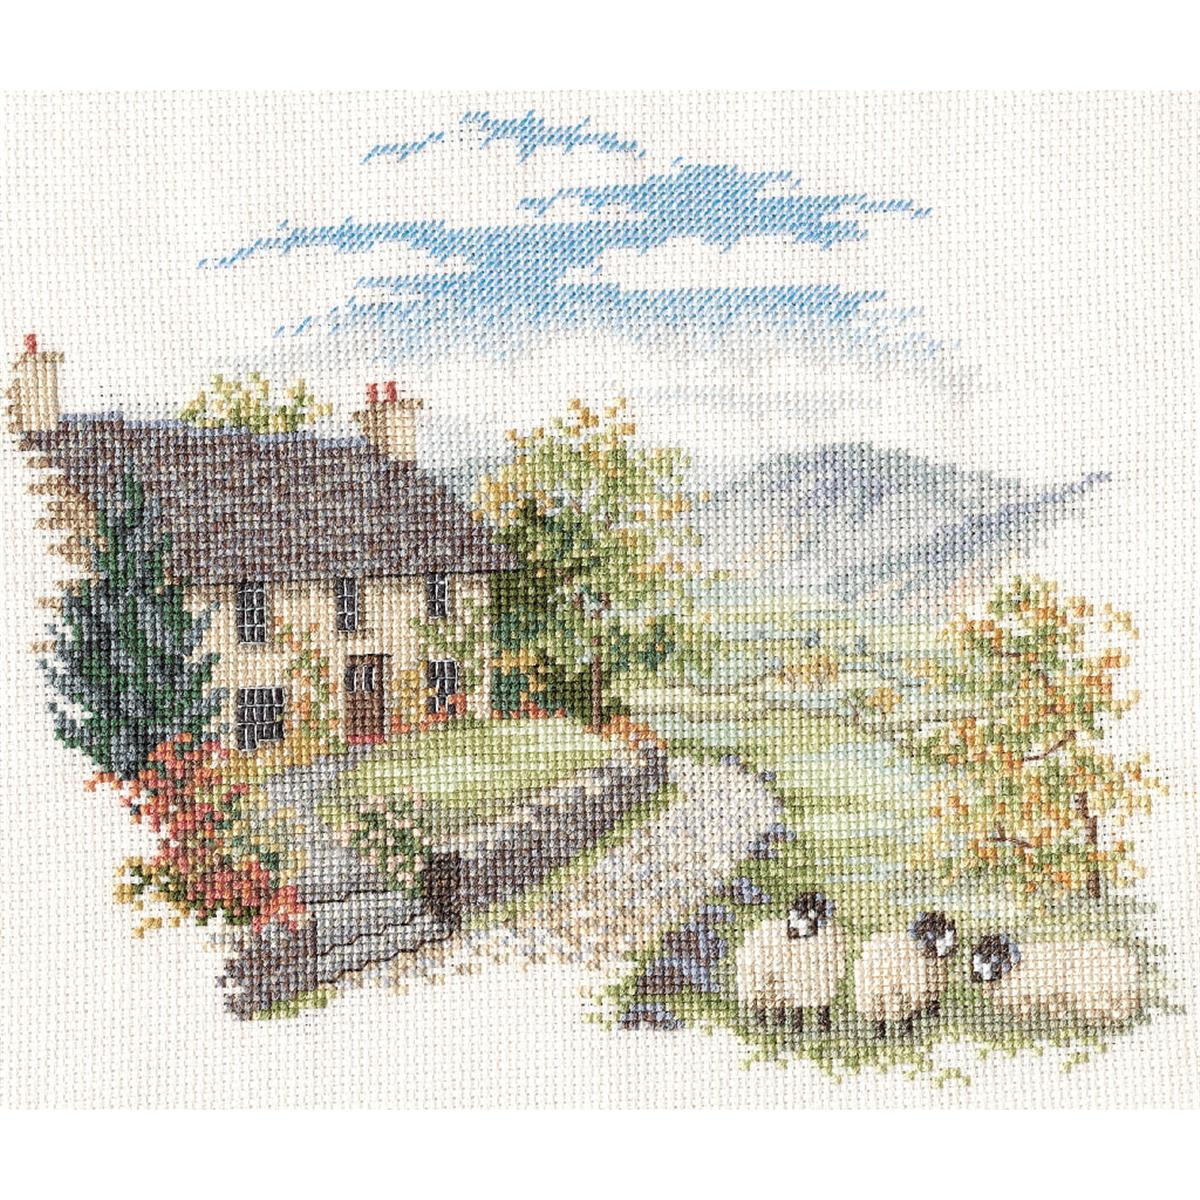 A beautifully designed embroidery pack with a rural...